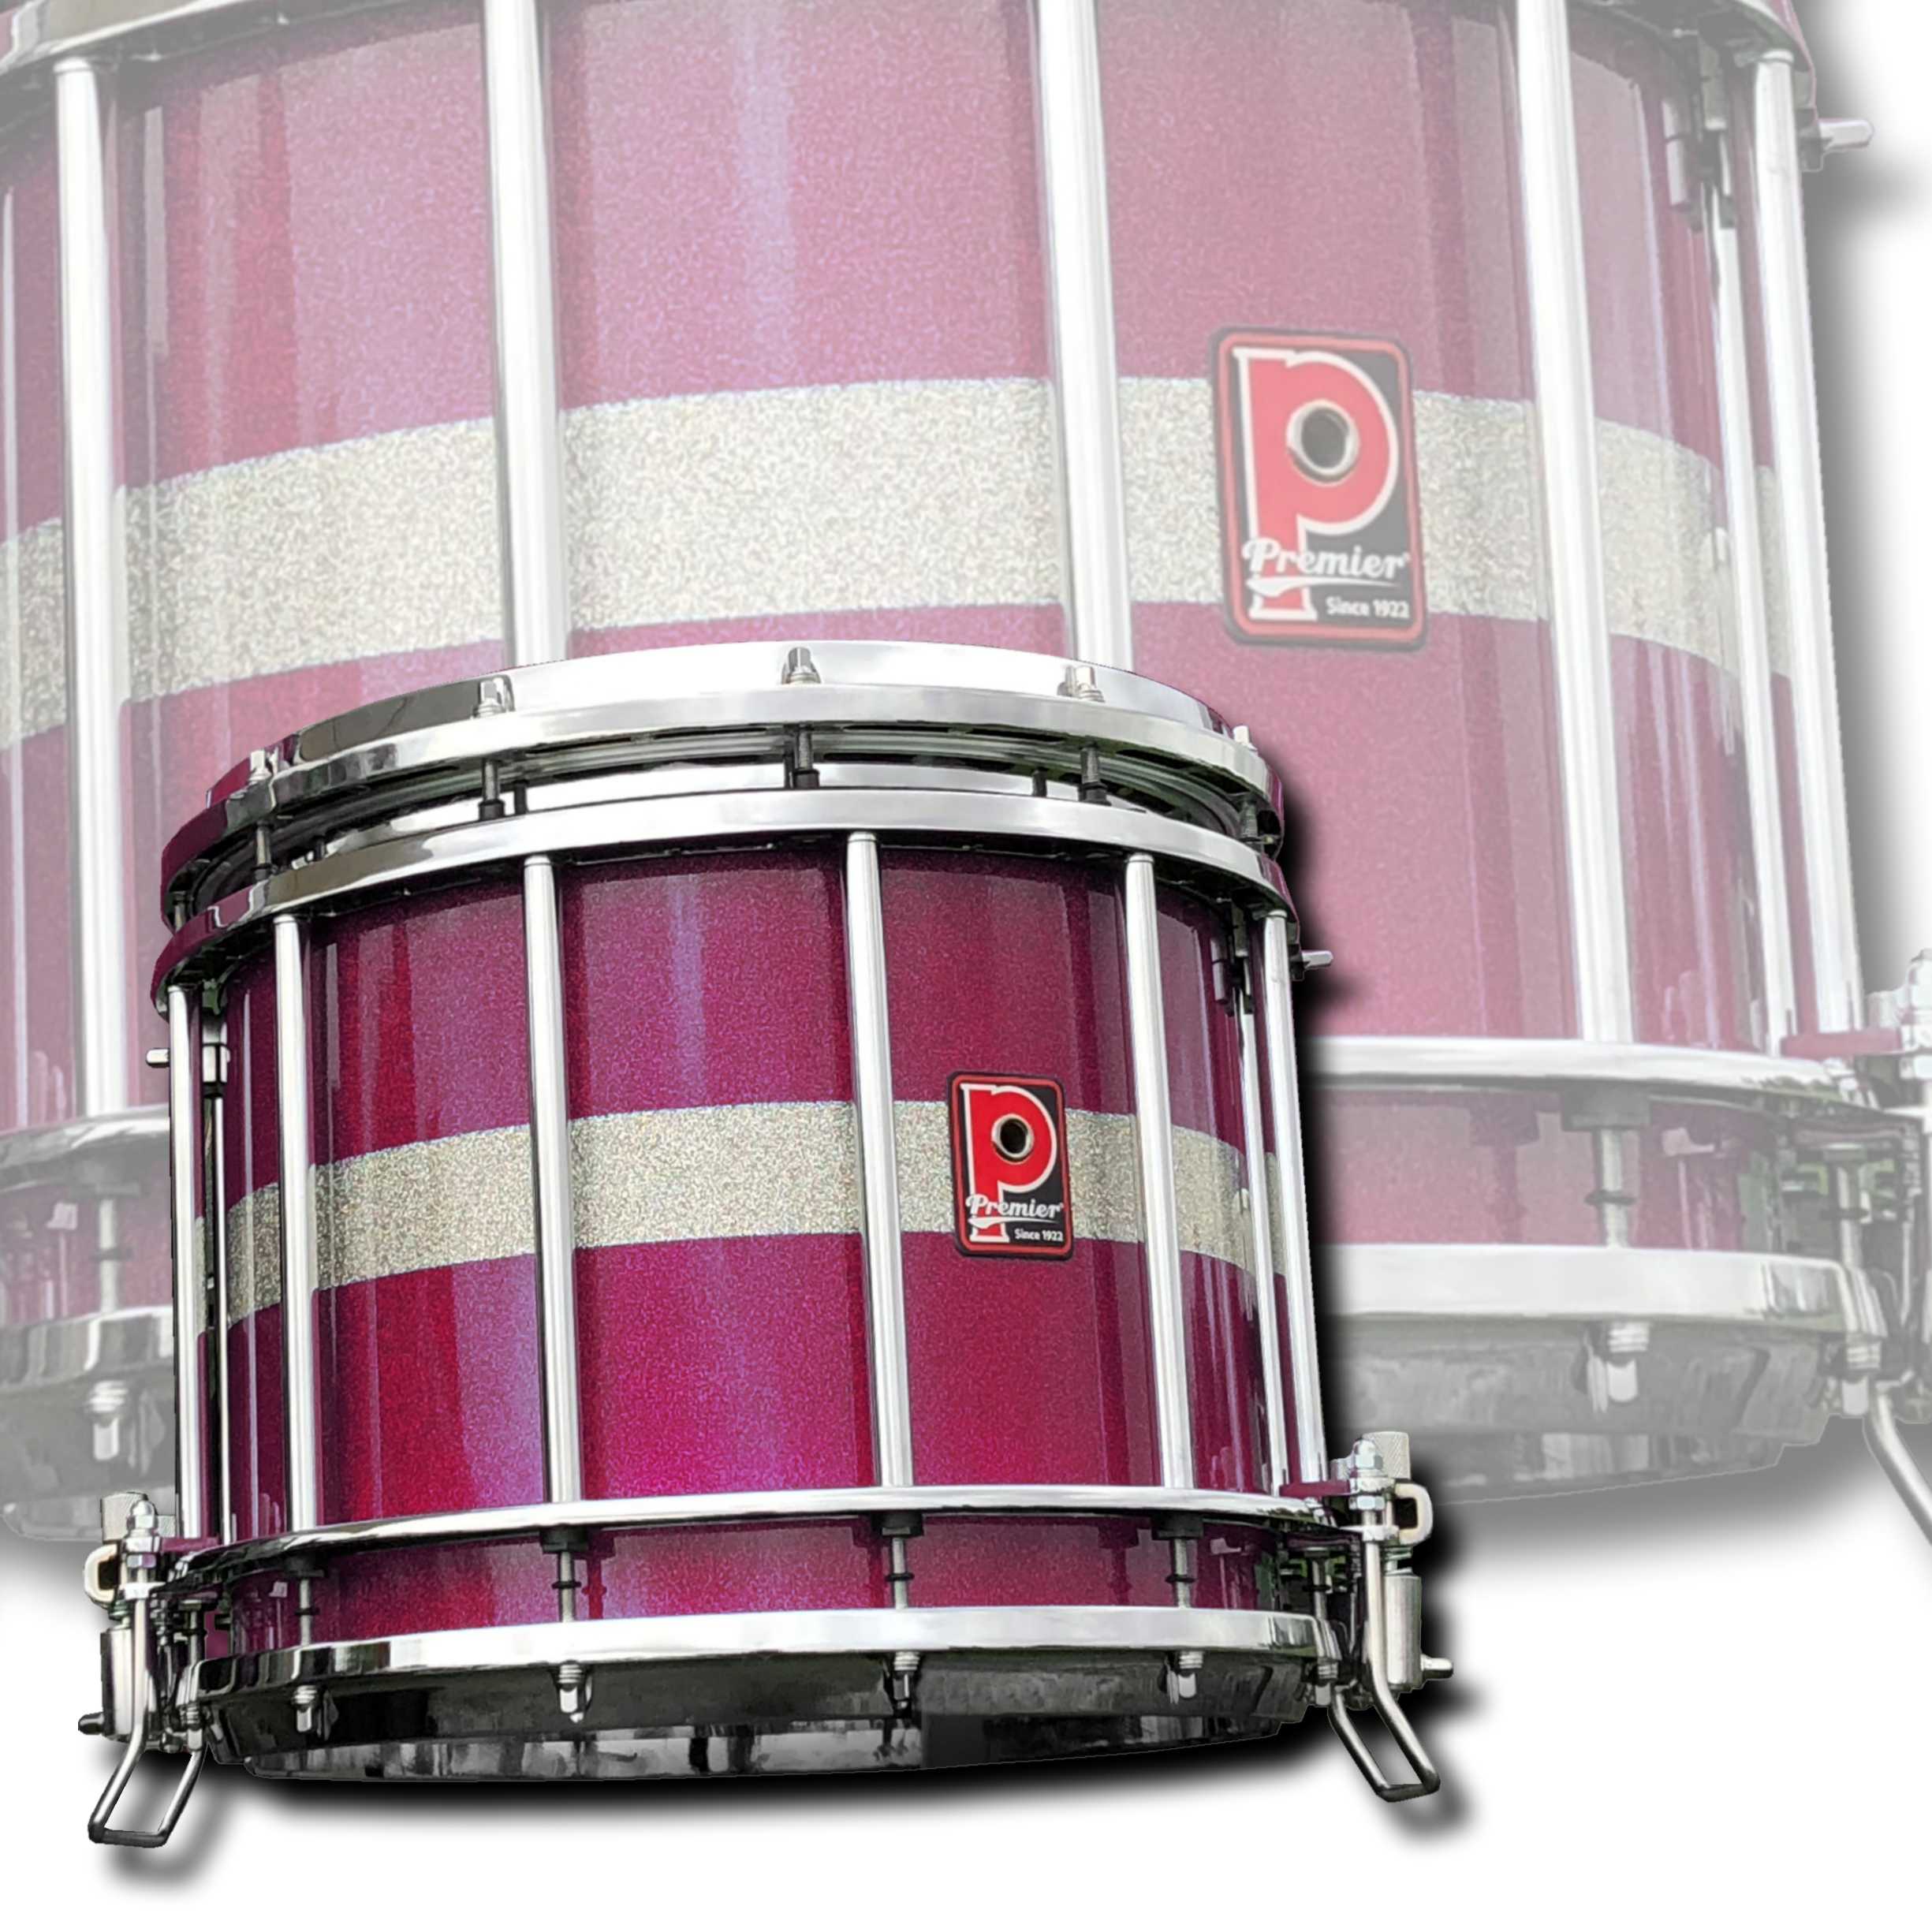 Premier Pipe Band HTS-0800Z-C 14"x12" Side Snare Drum Amethyst to Silver Blaze Sparkle - Chrome